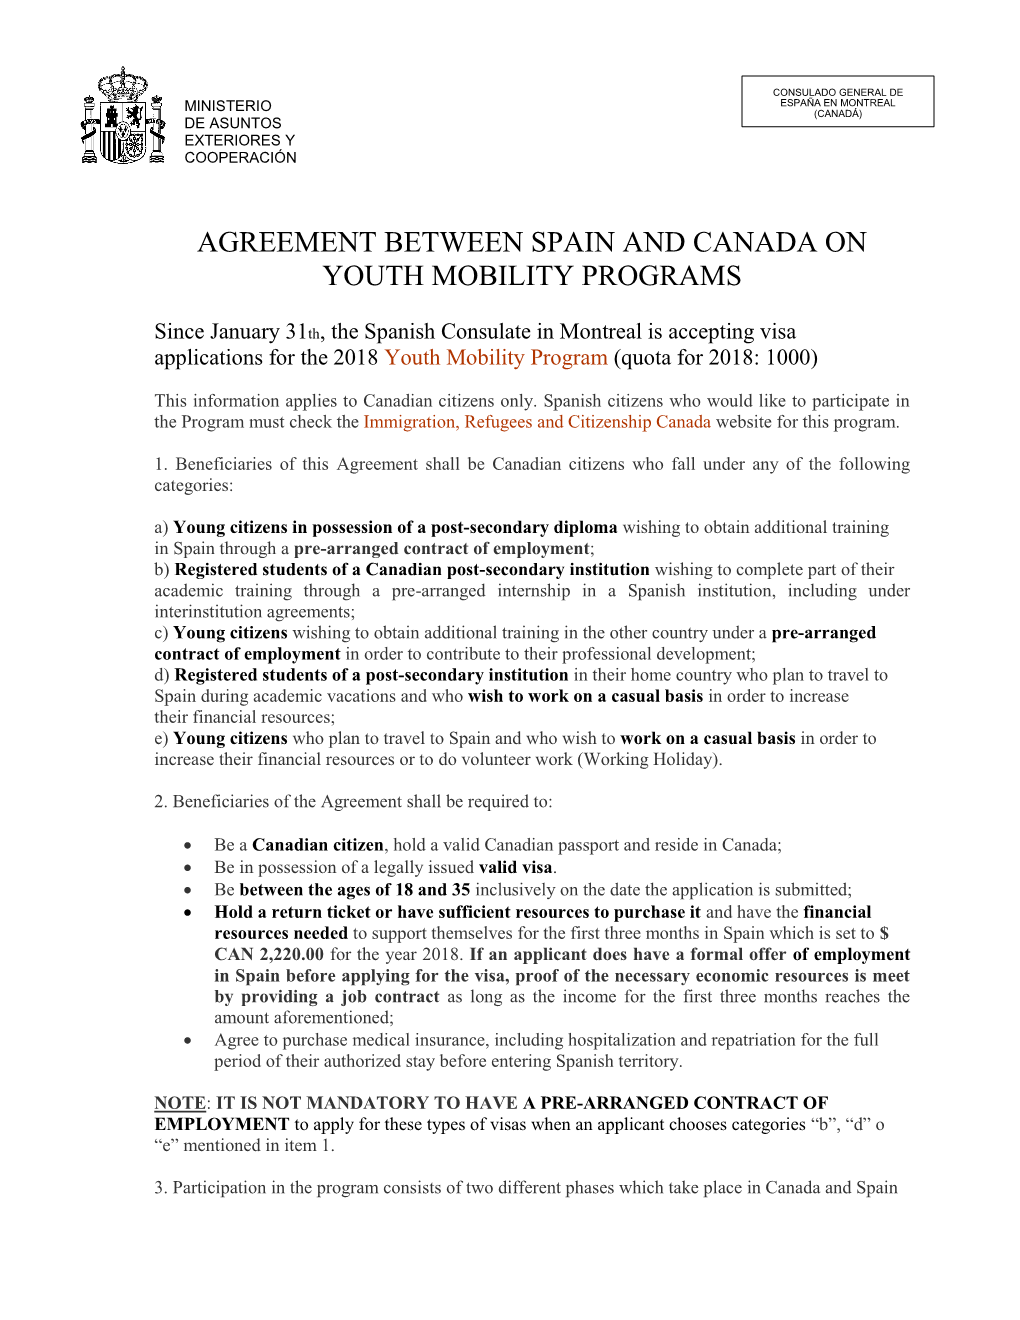 Agreement Between Spain and Canada on Youth Mobility Programs